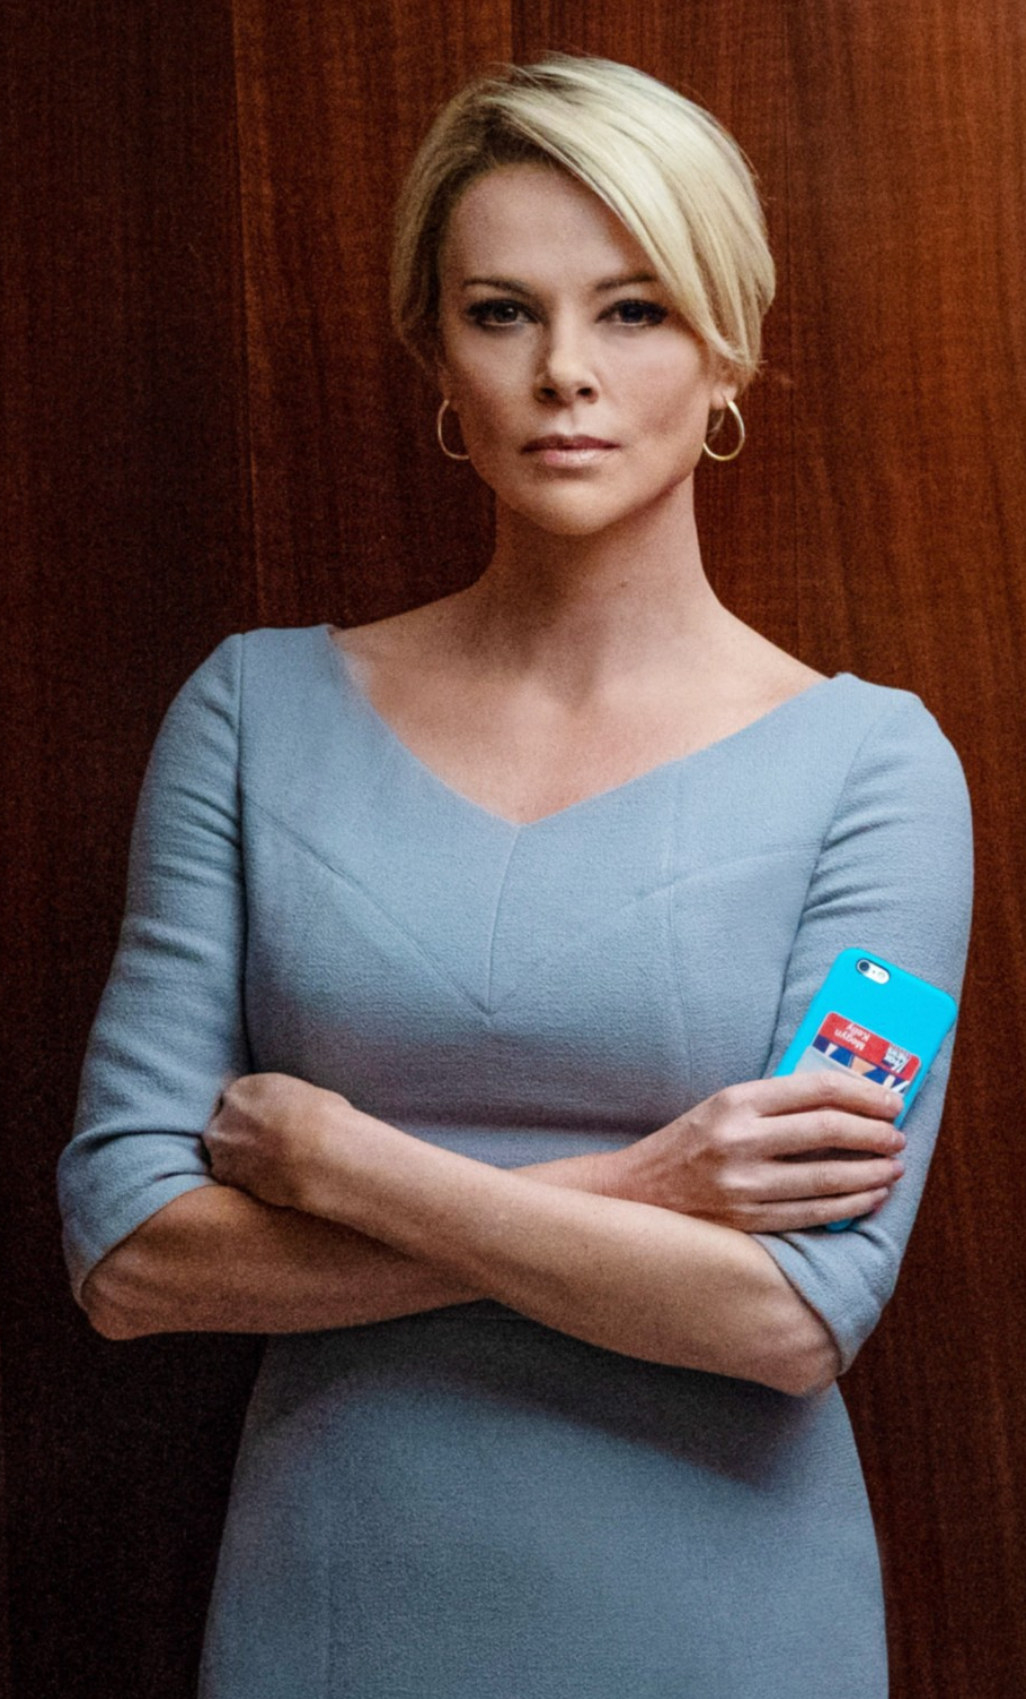 Theron folding her arms while wearing a tight dress and short, blonde hair in an elevator